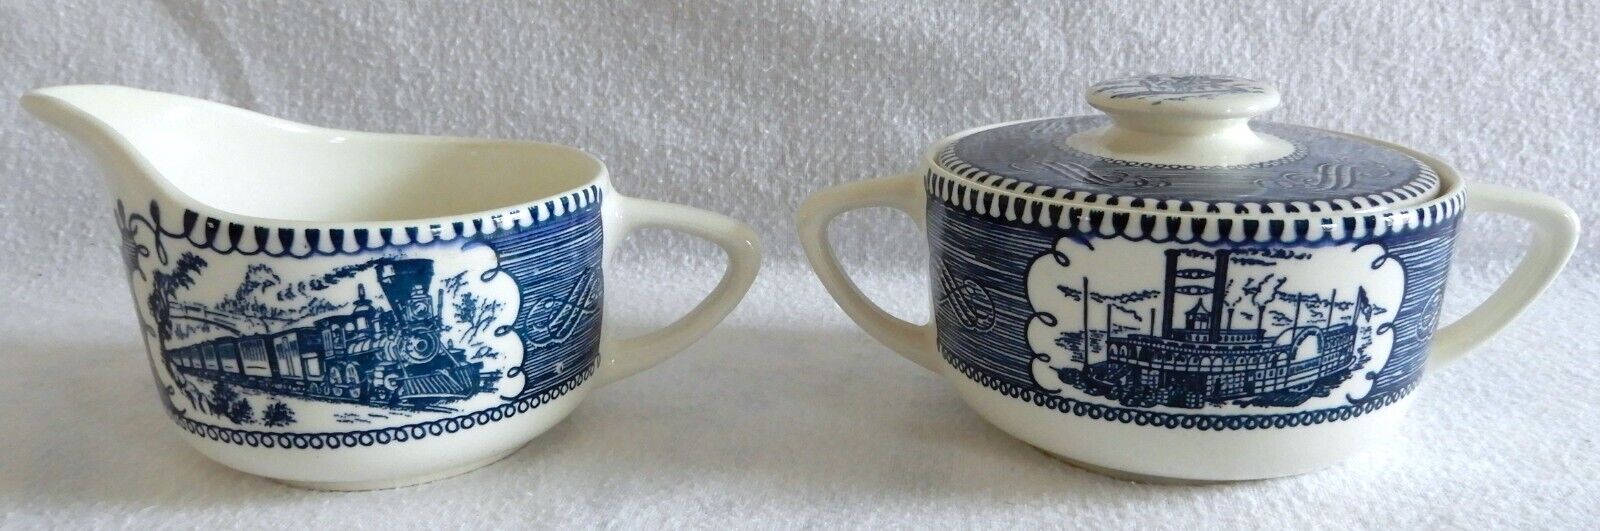 Vintage Currier & Ives Blue & White Royal China Handled Sugar with Lid & Creamer